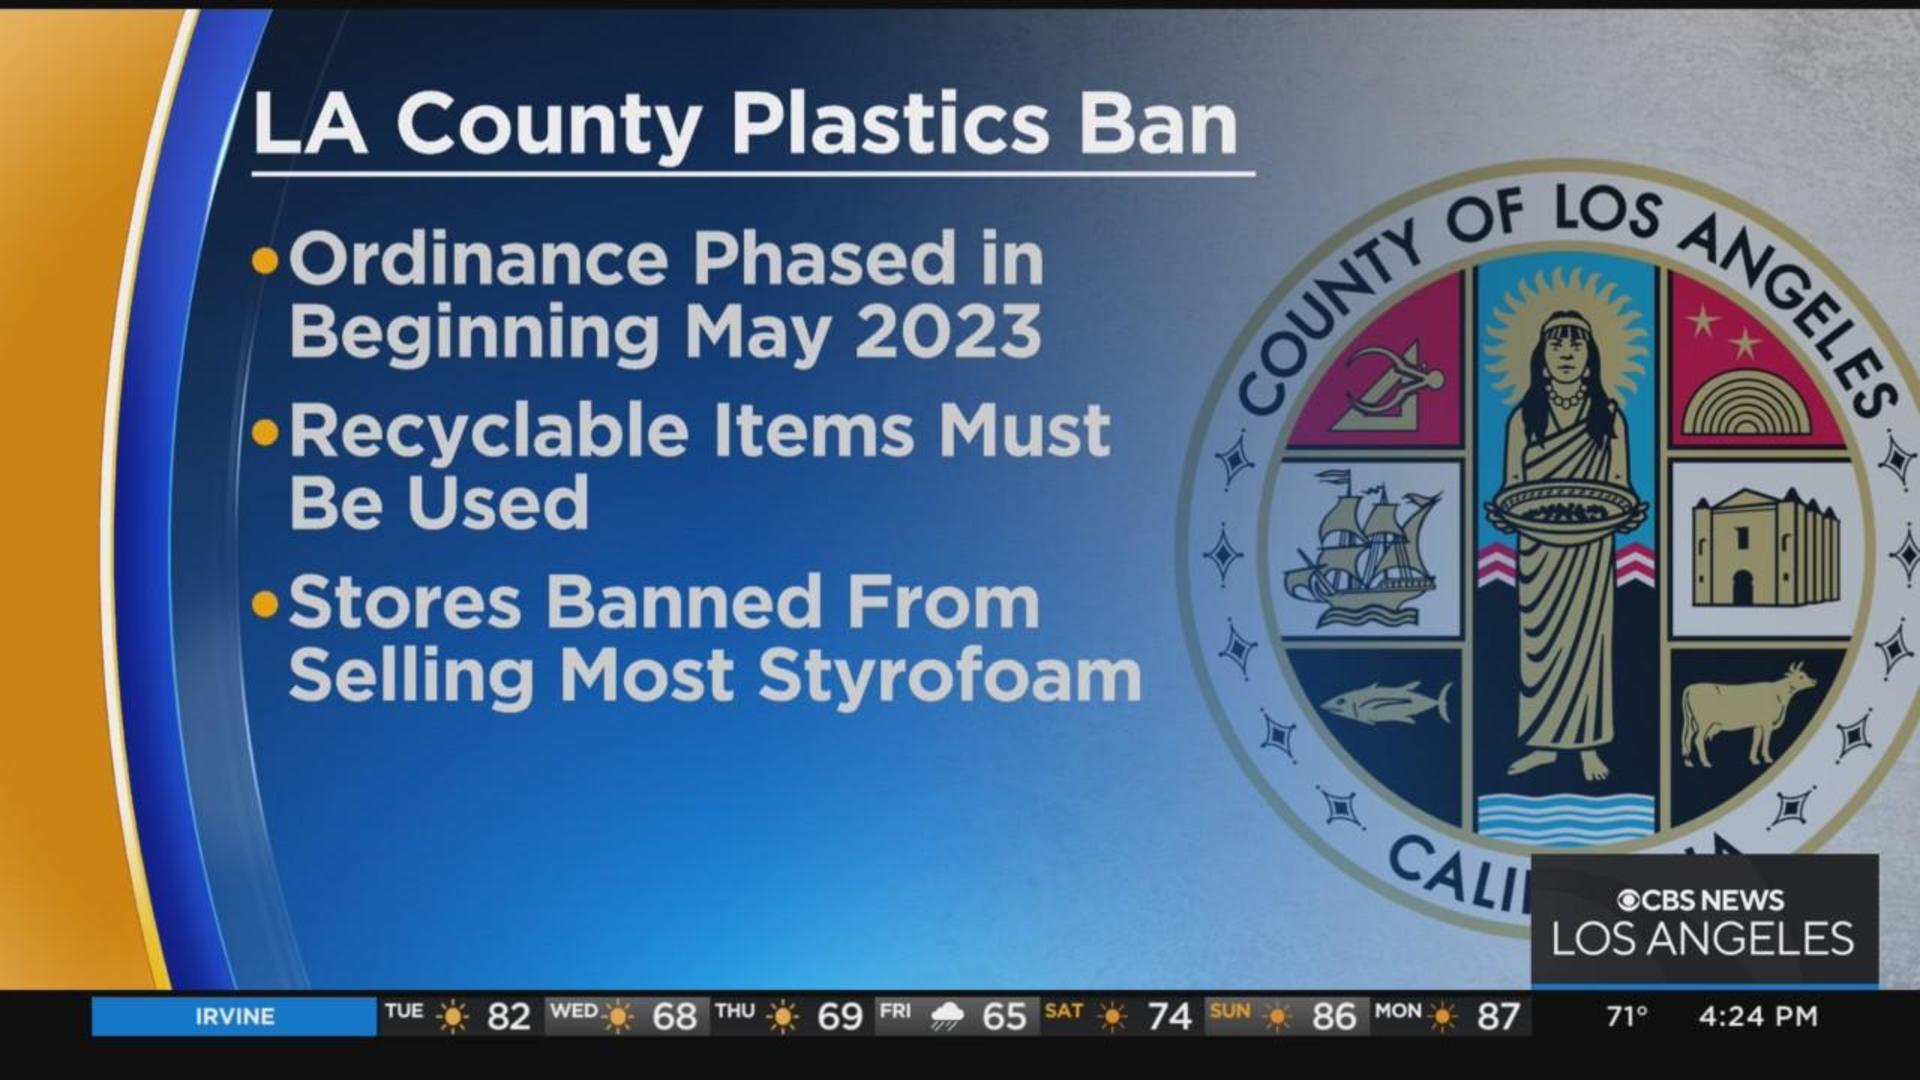 Long Beach bans single-use foam containers for restaurants, food providers  – Press Telegram